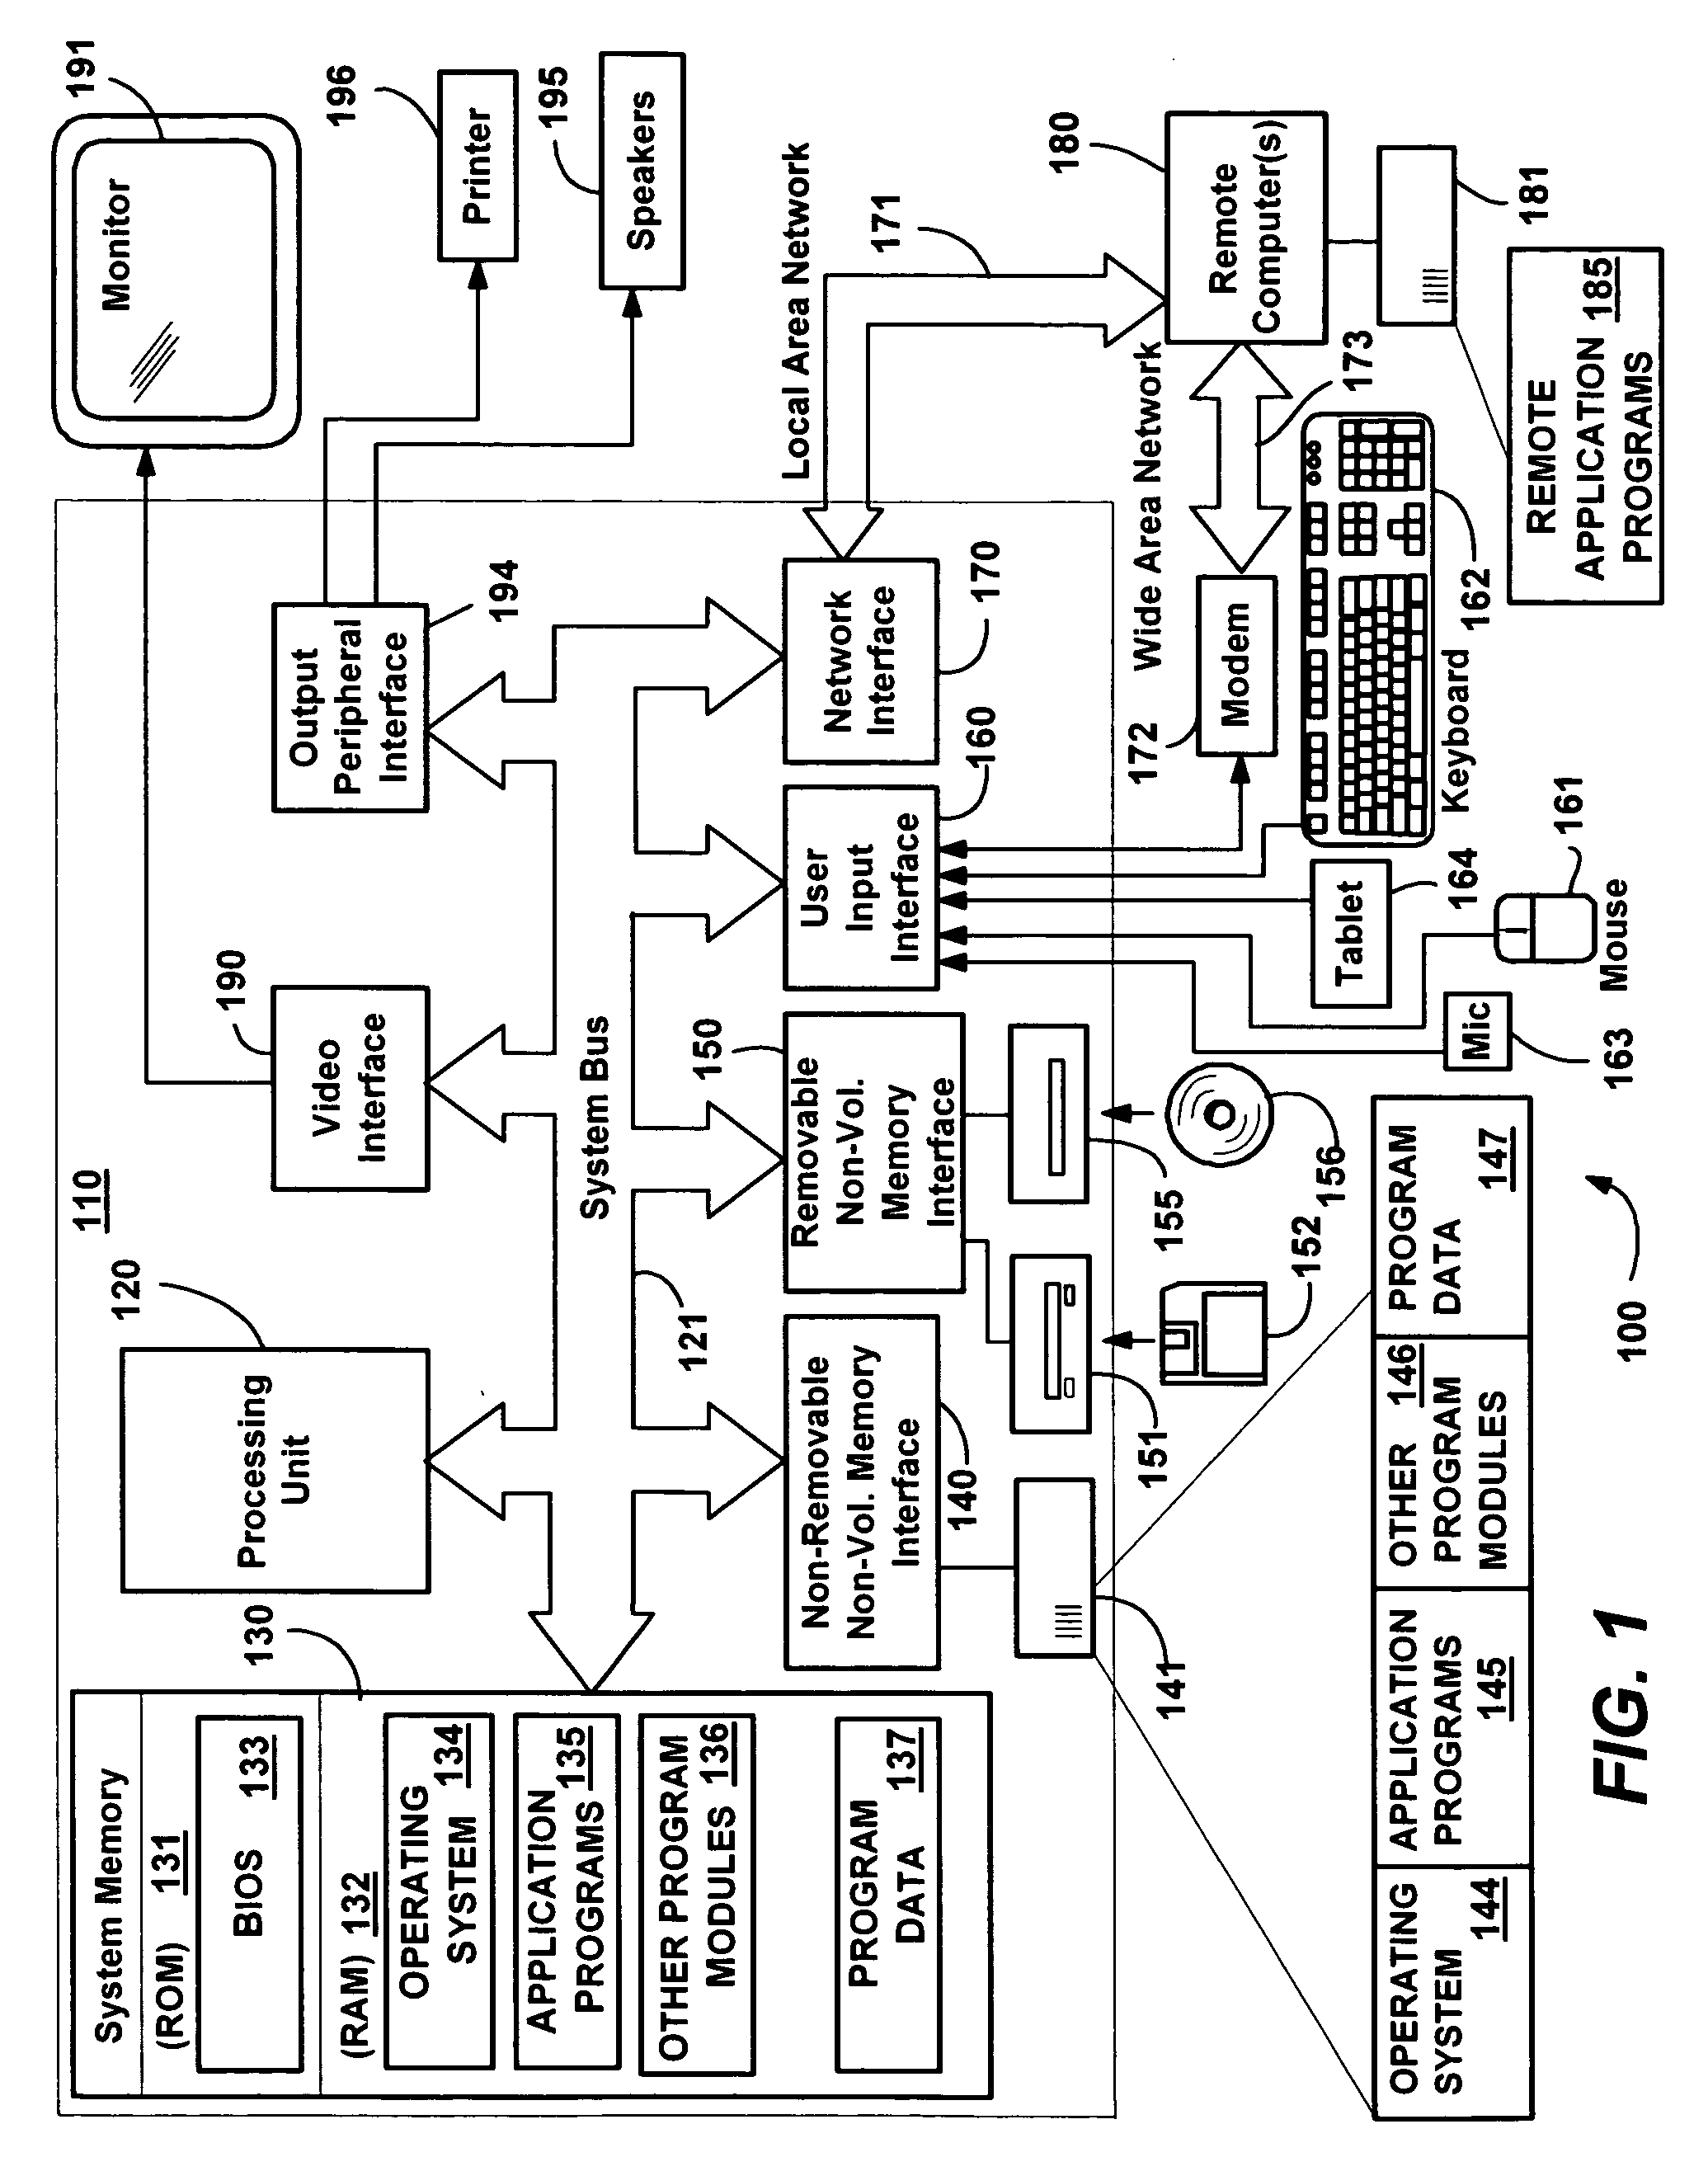 Data source objects for producing collections of data items